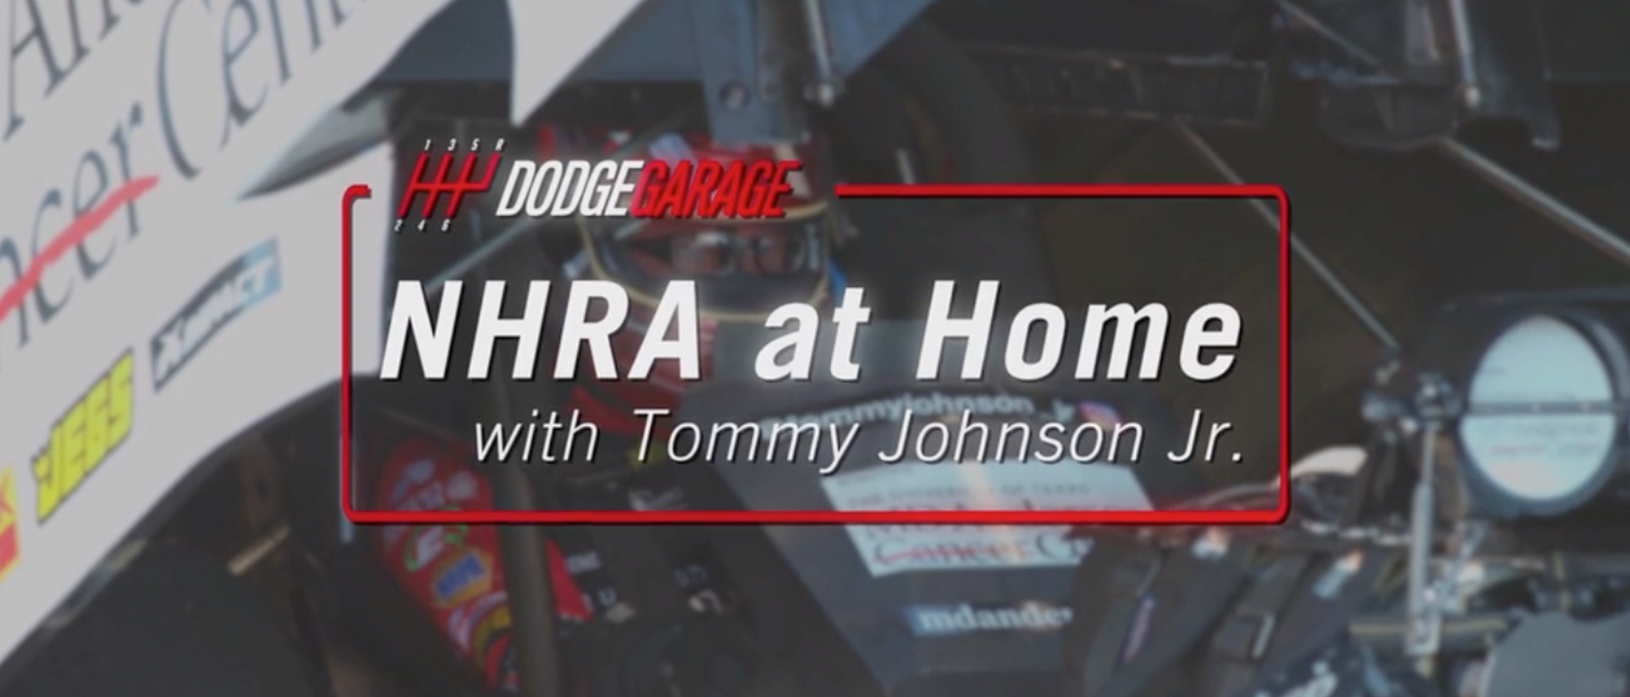 NHRA at Home with Tommy Johnson Jr. – Home Improvement